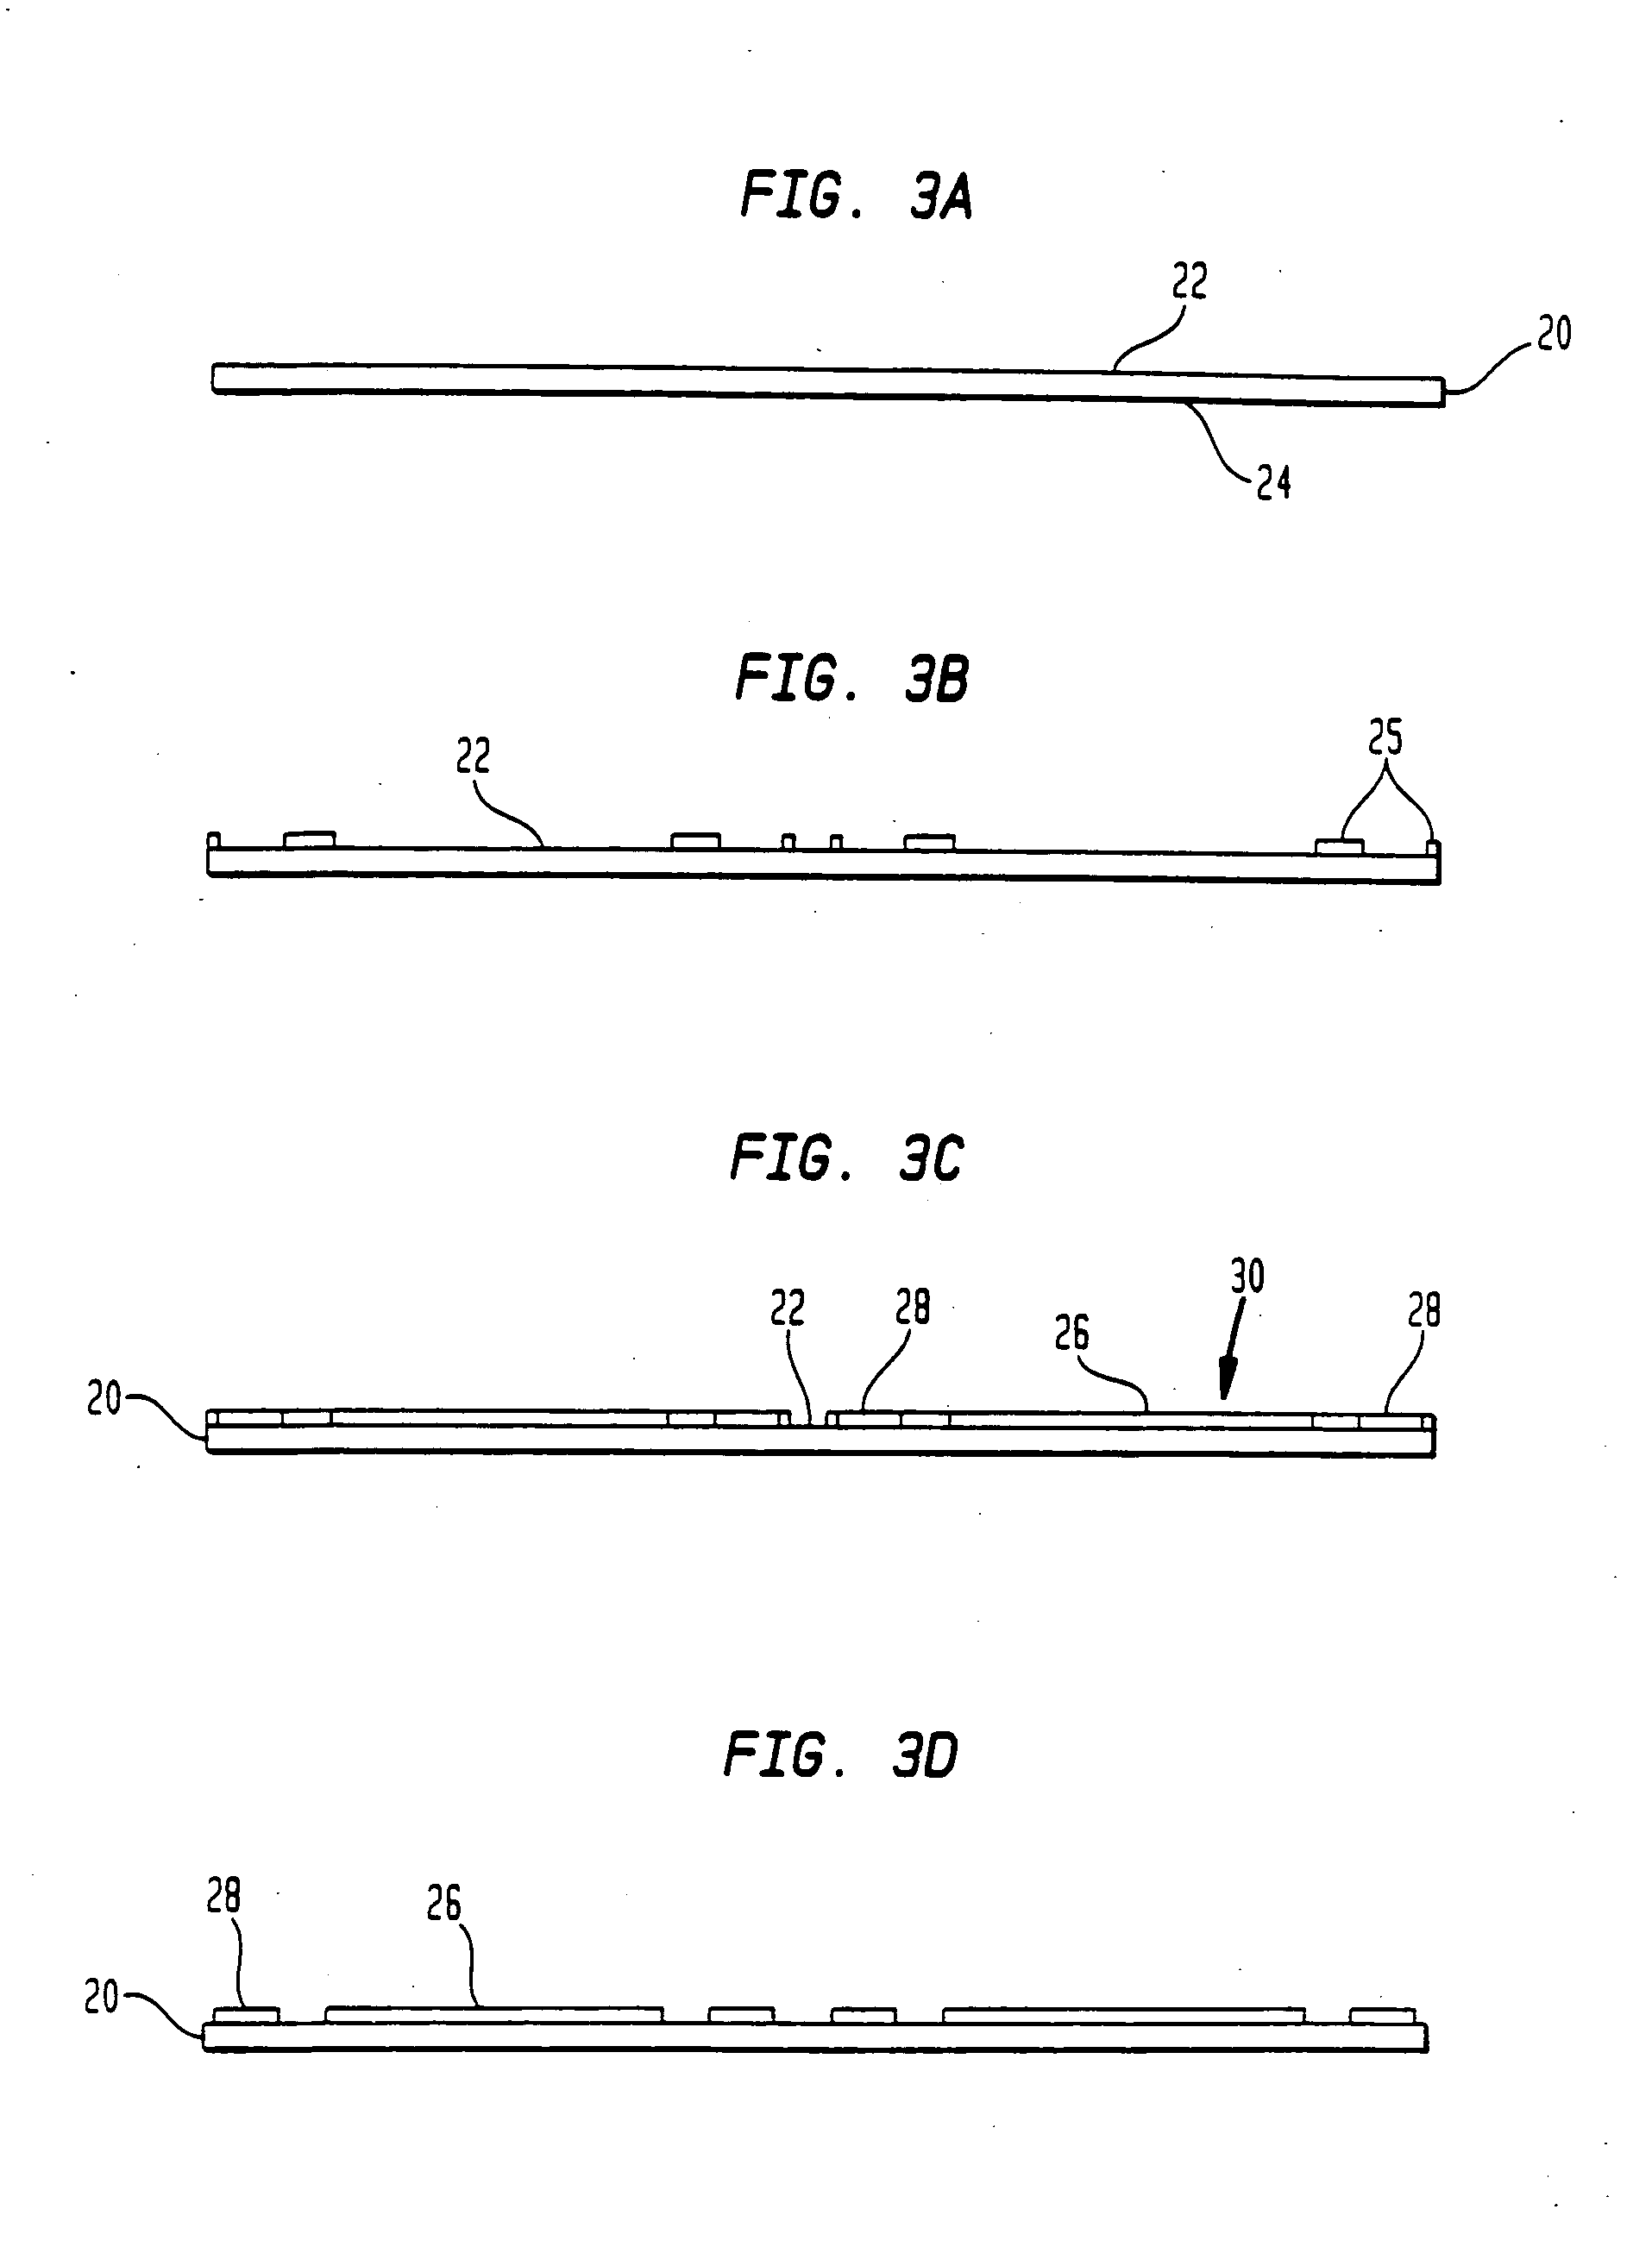 Semiconductor package having light sensitive chips